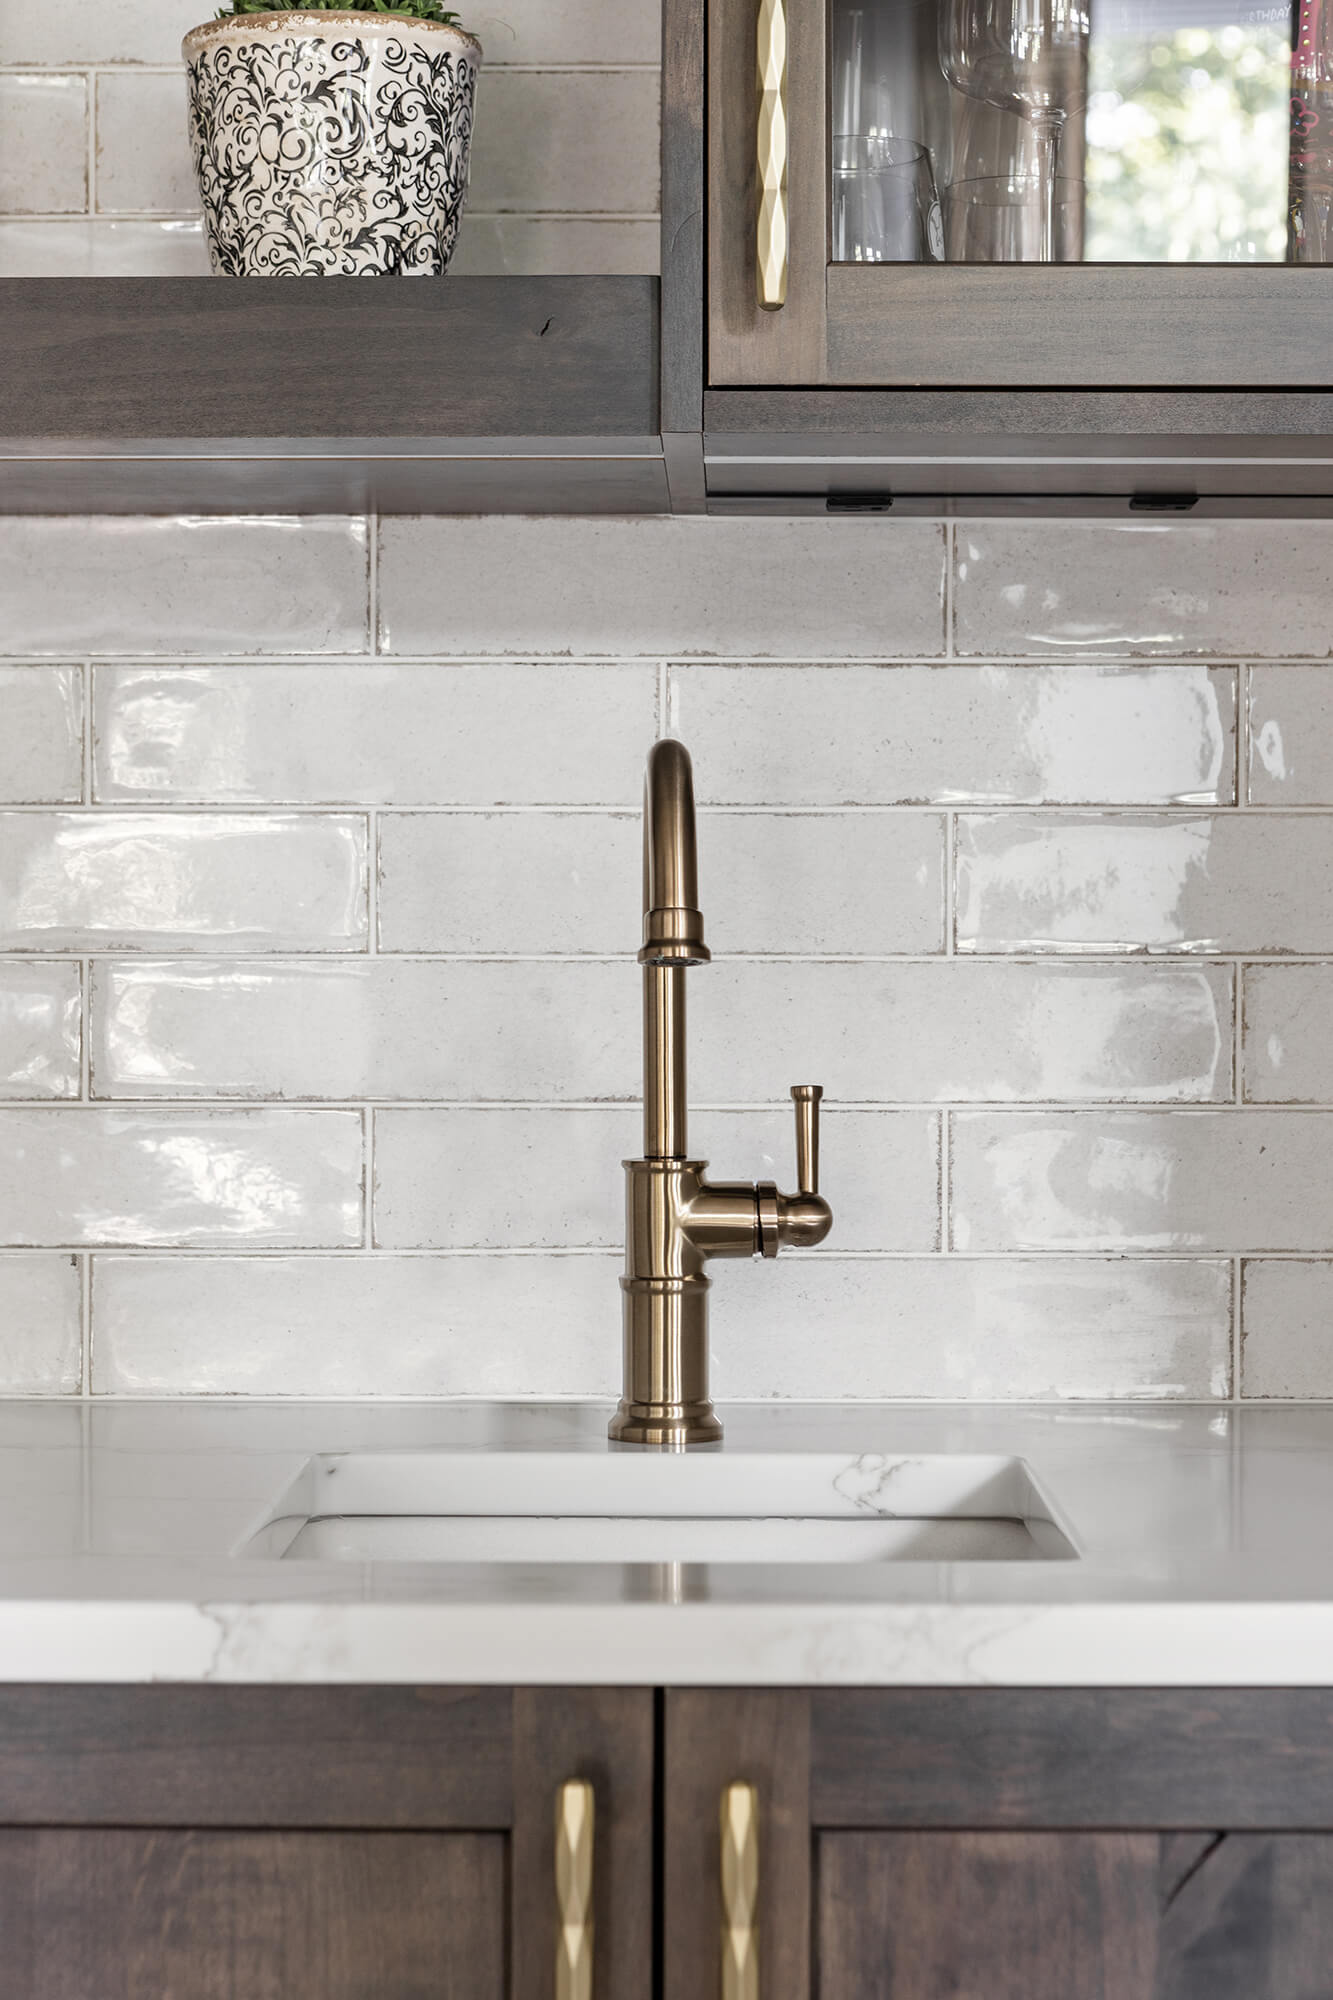 A brushed brass faucet and cabinet hardware goes beautifully with the dark stained kitchen cabinets.